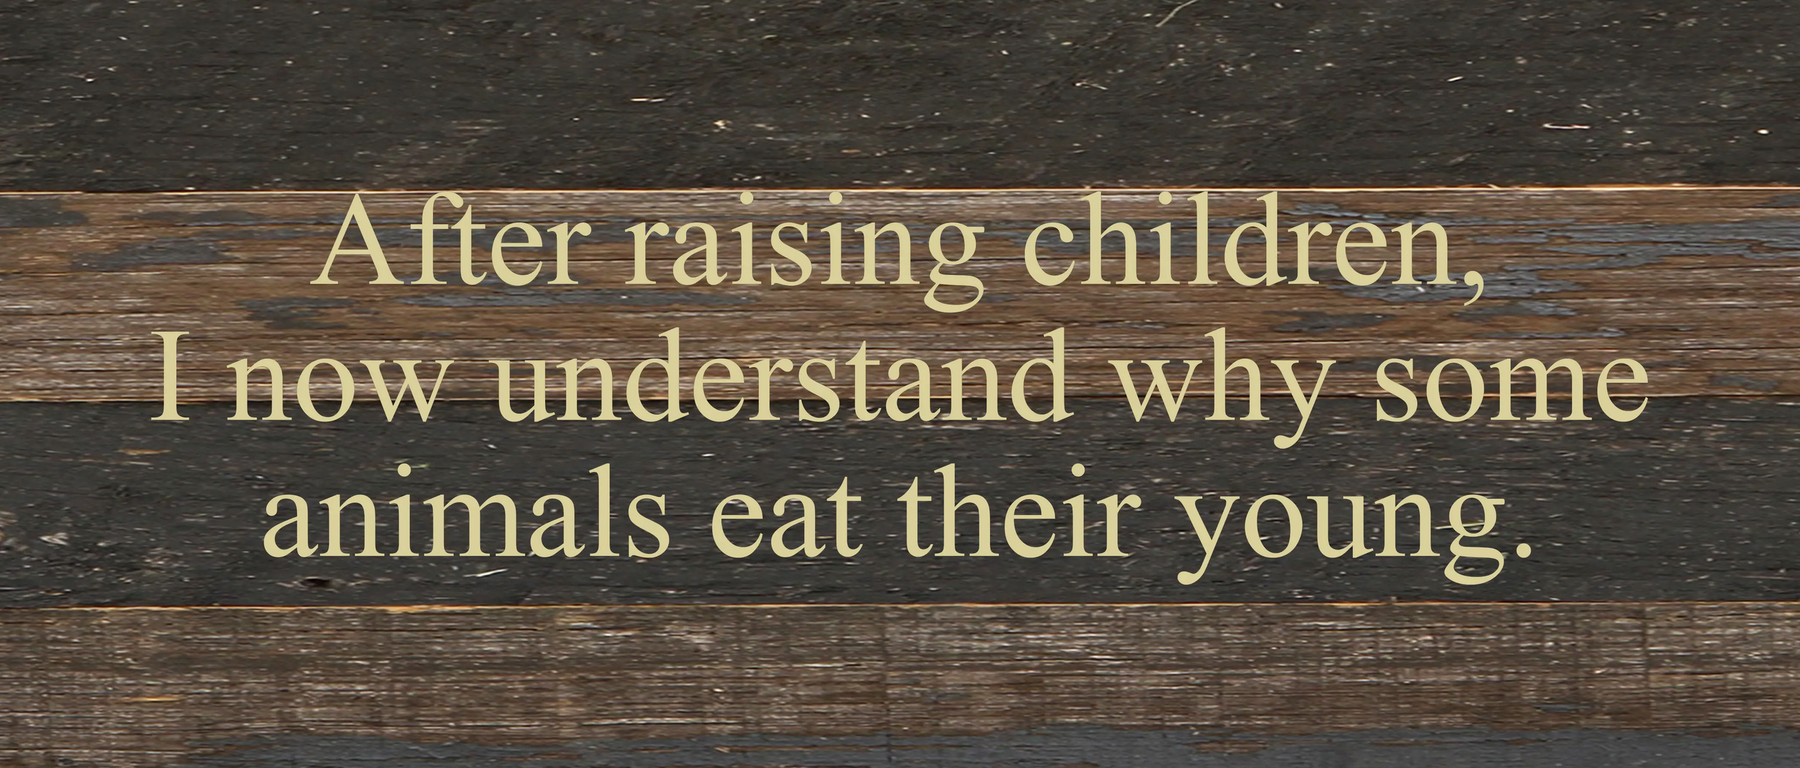 After raising children, I now understand why some animals eat their young. / 14"x6" Reclaimed Wood Sign